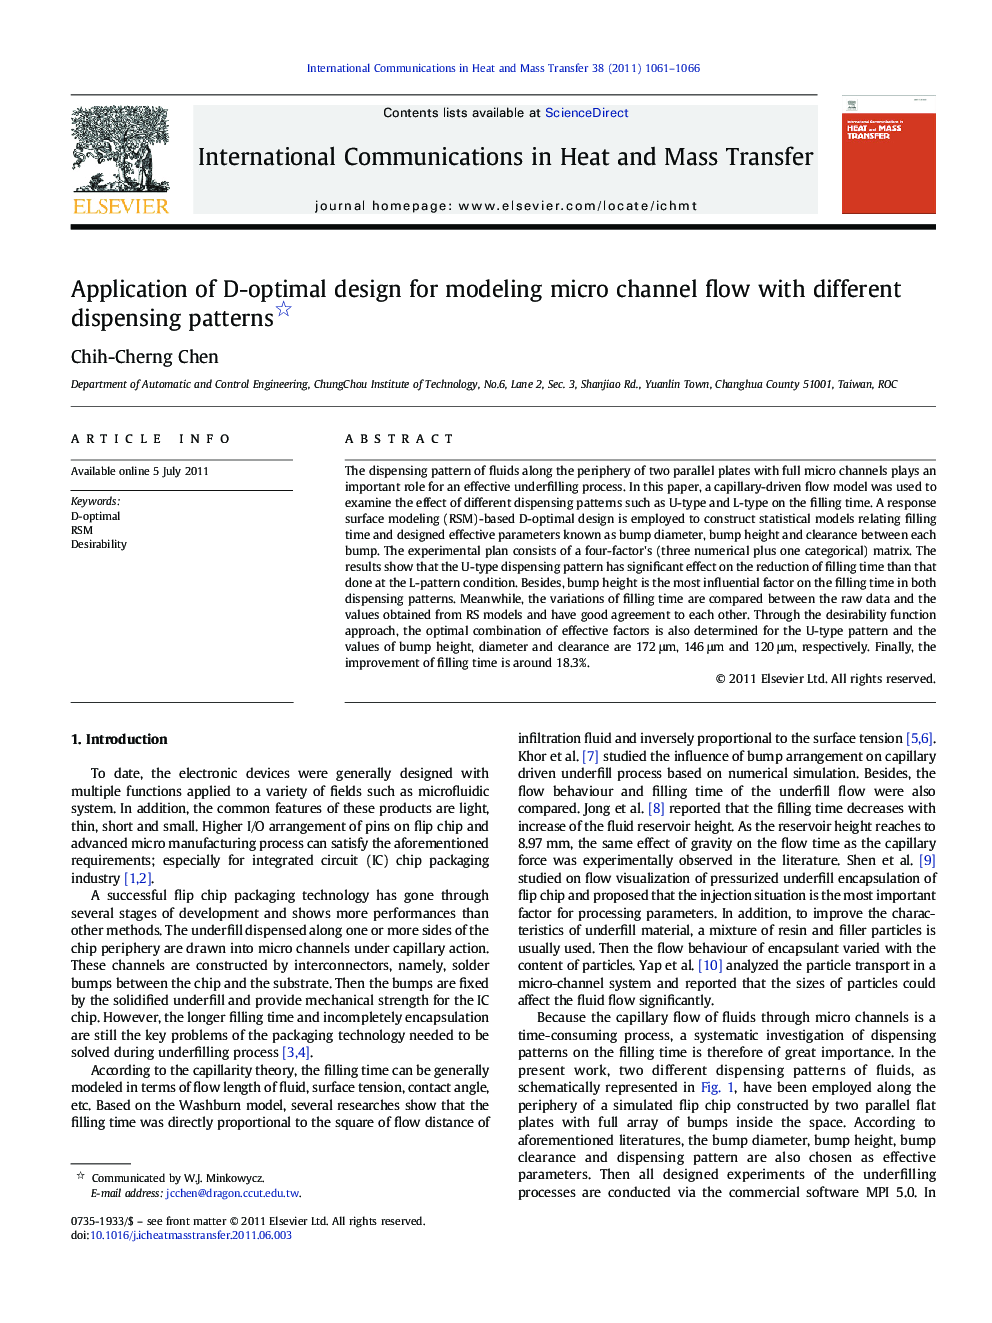 Application of D-optimal design for modeling micro channel flow with different dispensing patterns 